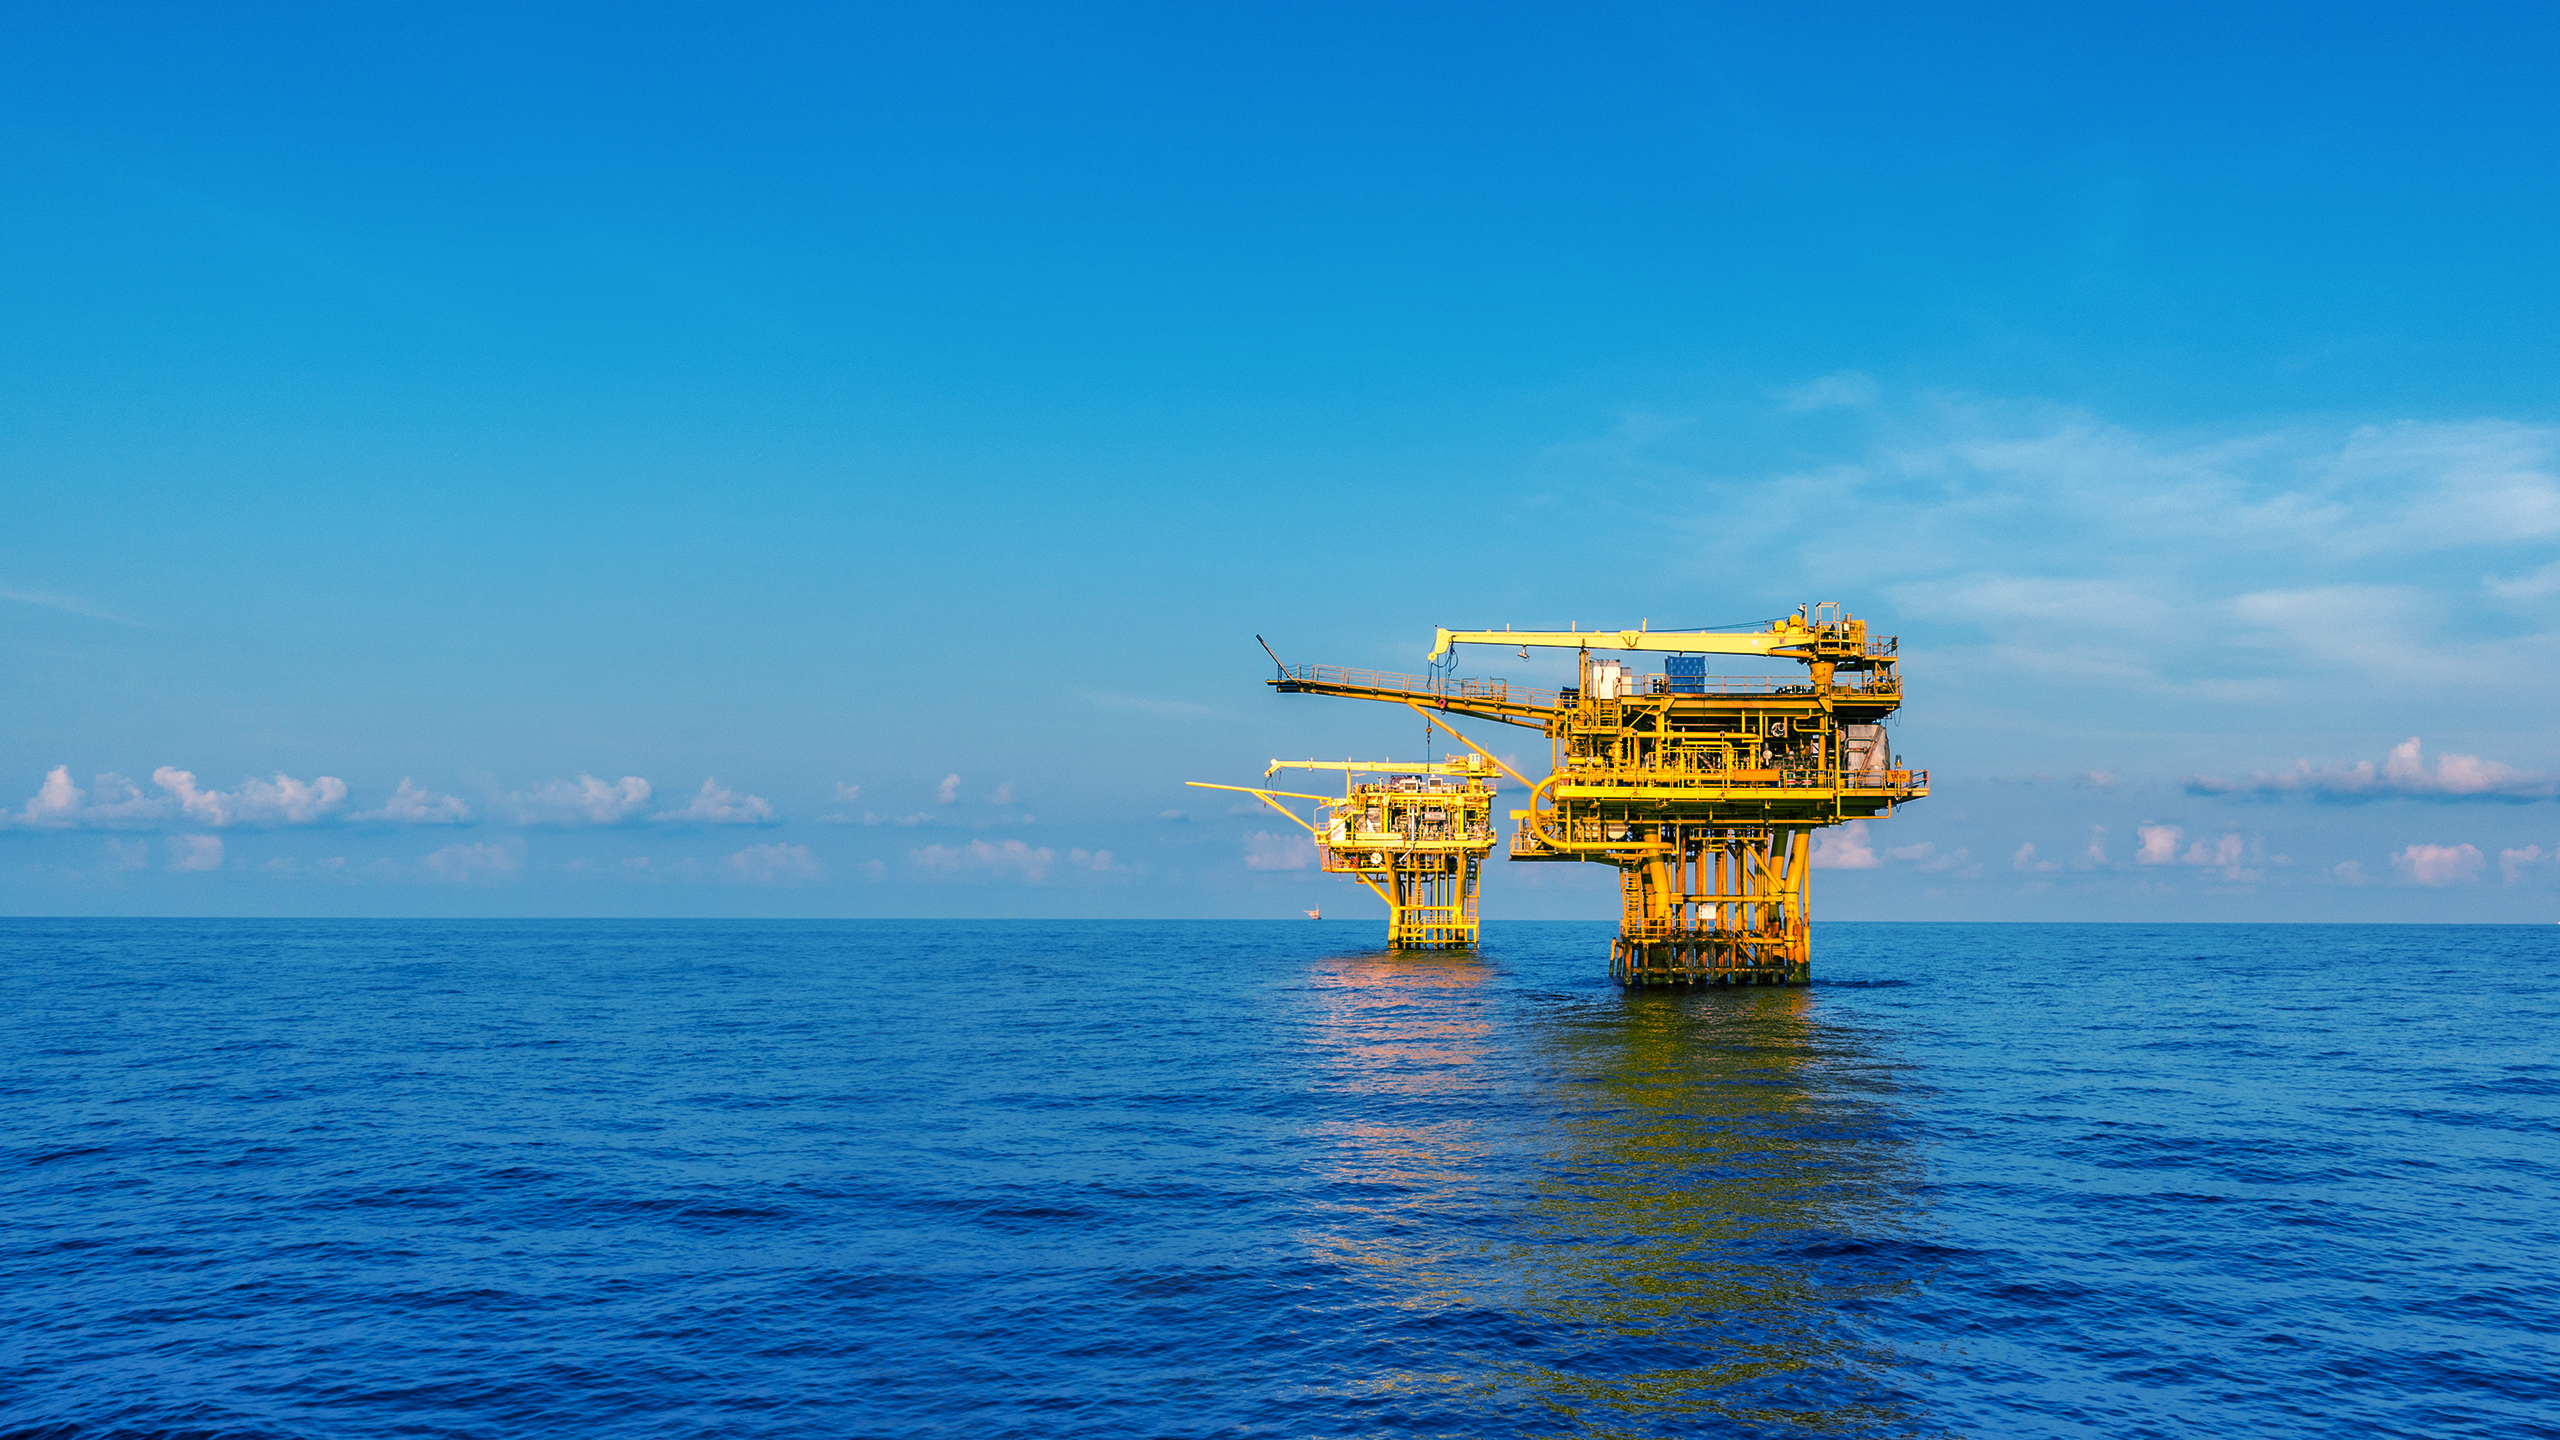 Digital transformation in the Oil & Gas industry